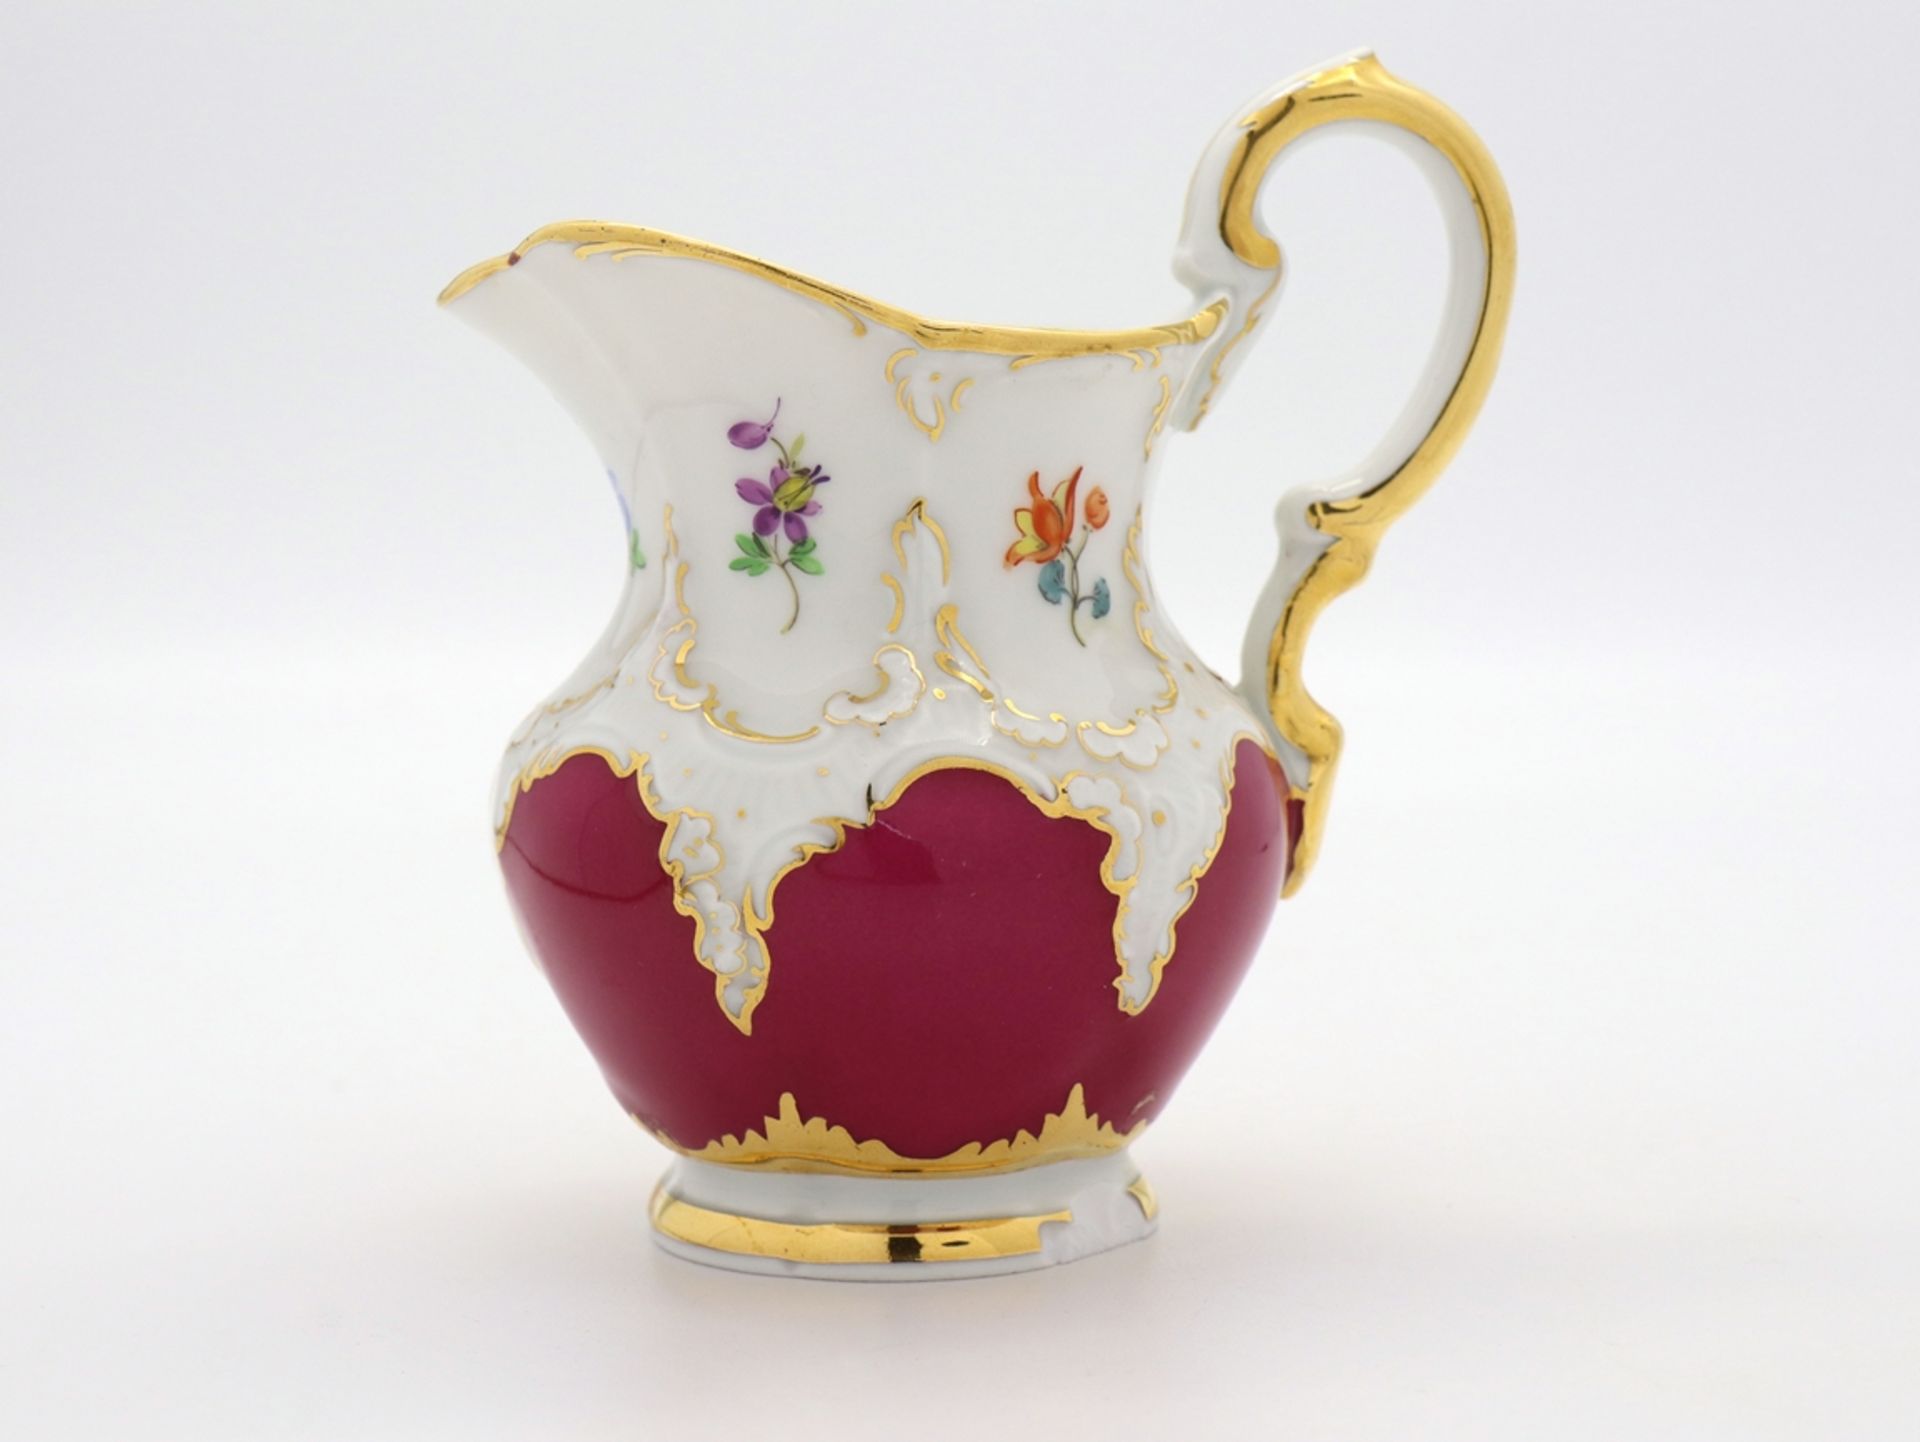 Meissen splendour cream jug, B-form 1st choice in noble purple with scattered flowers, after 1945.